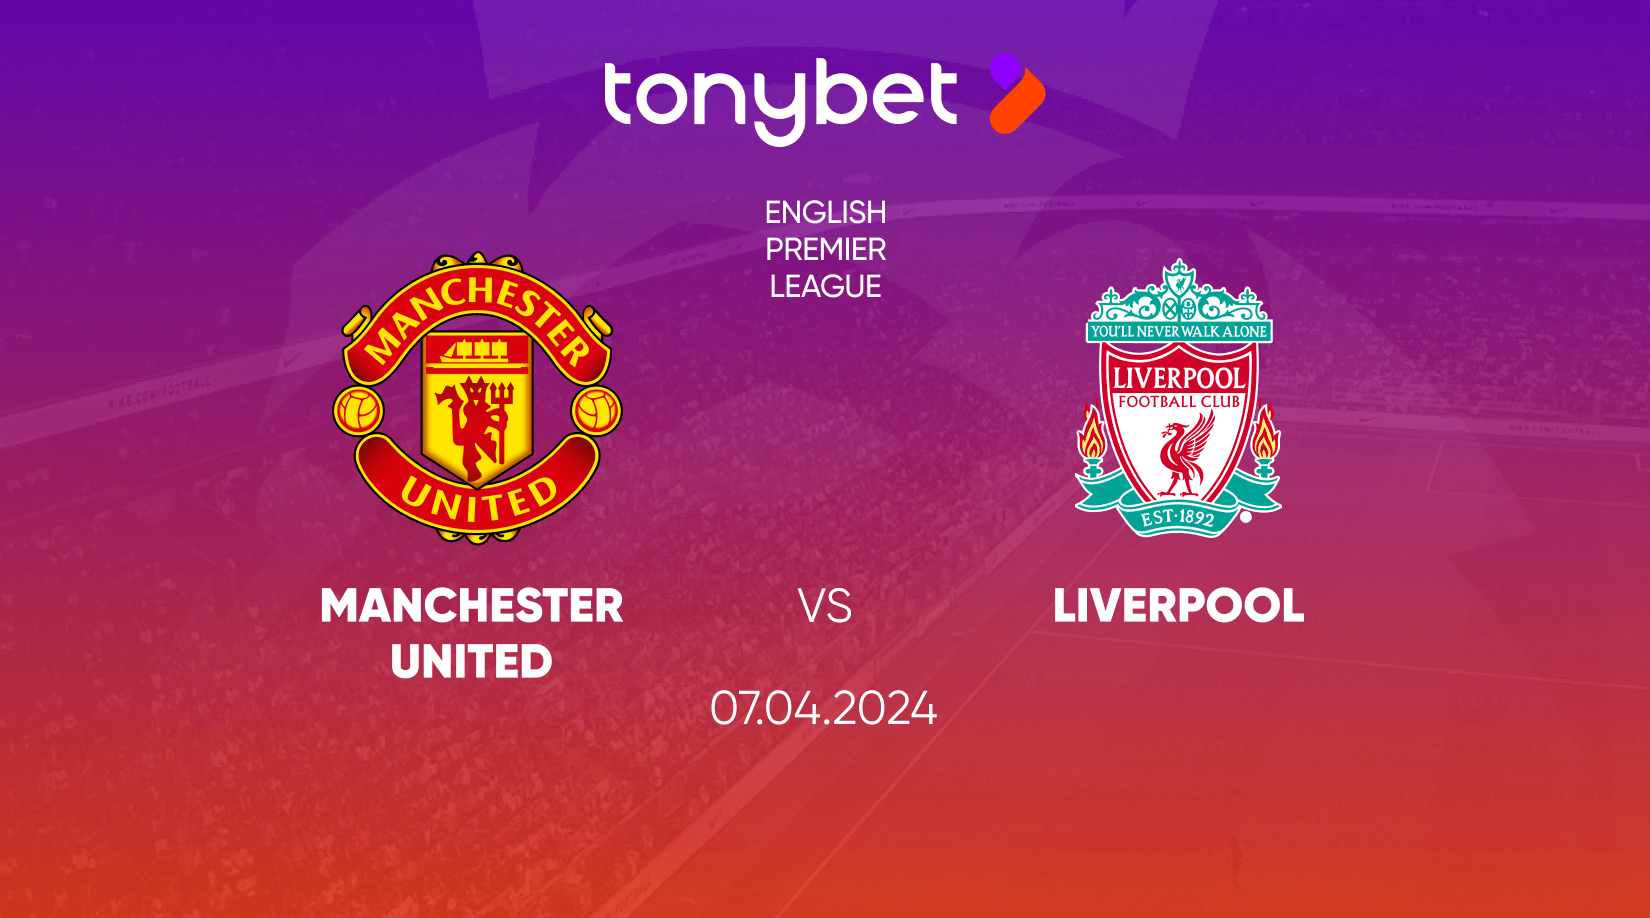 Manchester United vs Liverpool, Odds and Betting Tips 07/04/2024